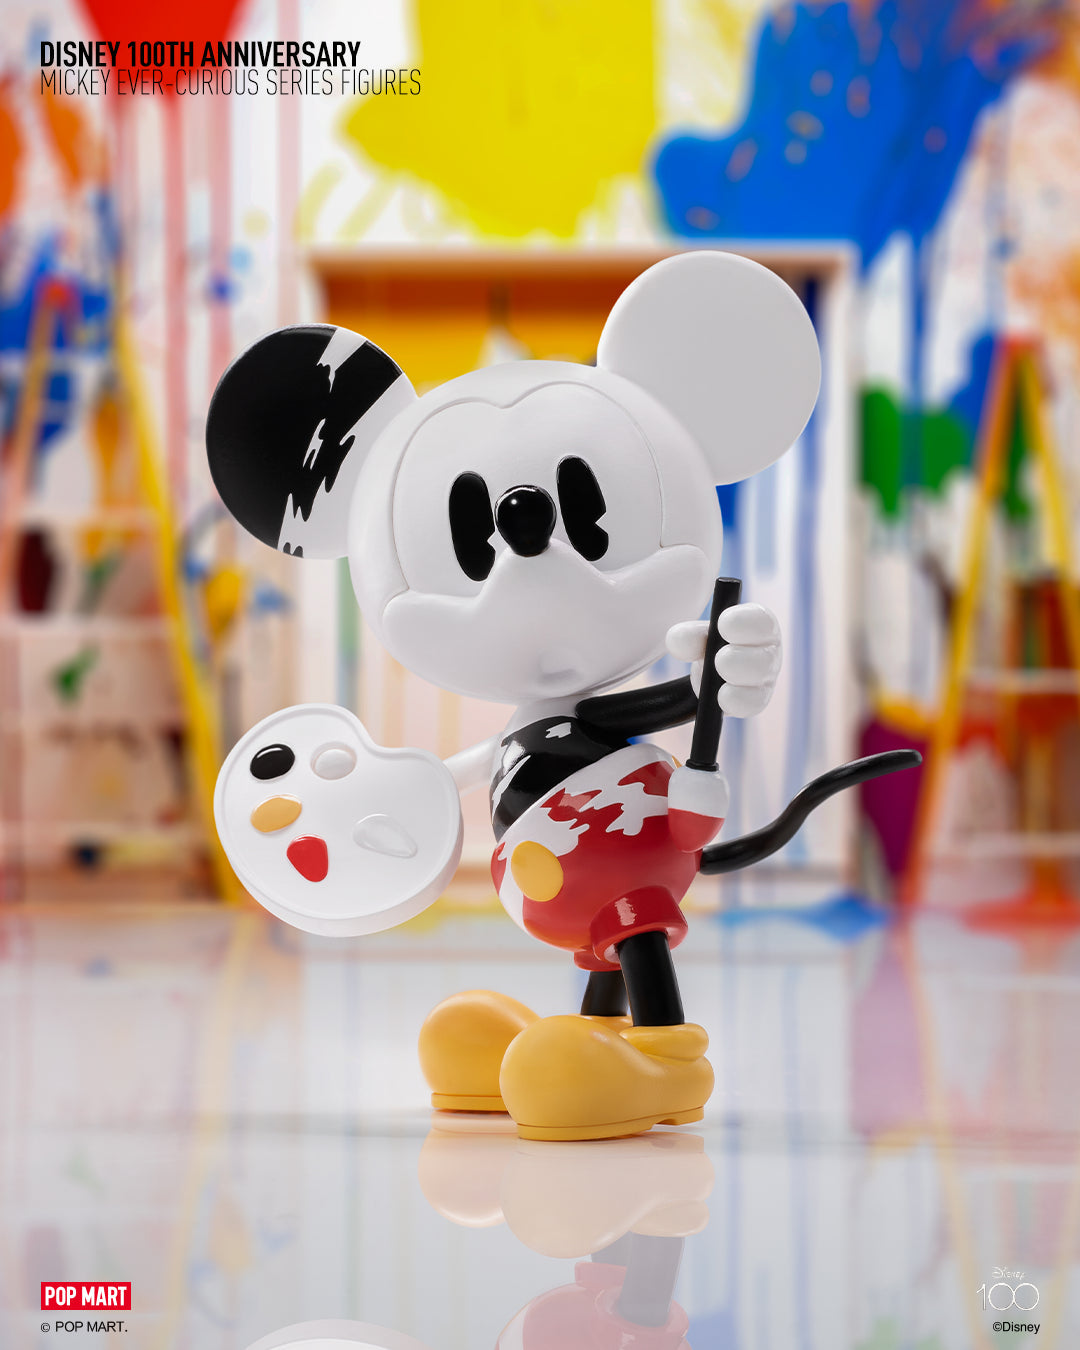 Pop Mart Disney 100th Anniversary Mickey Ever-Curious Series-Single Box (Random)-Pop Mart-Ace Cards &amp; Collectibles